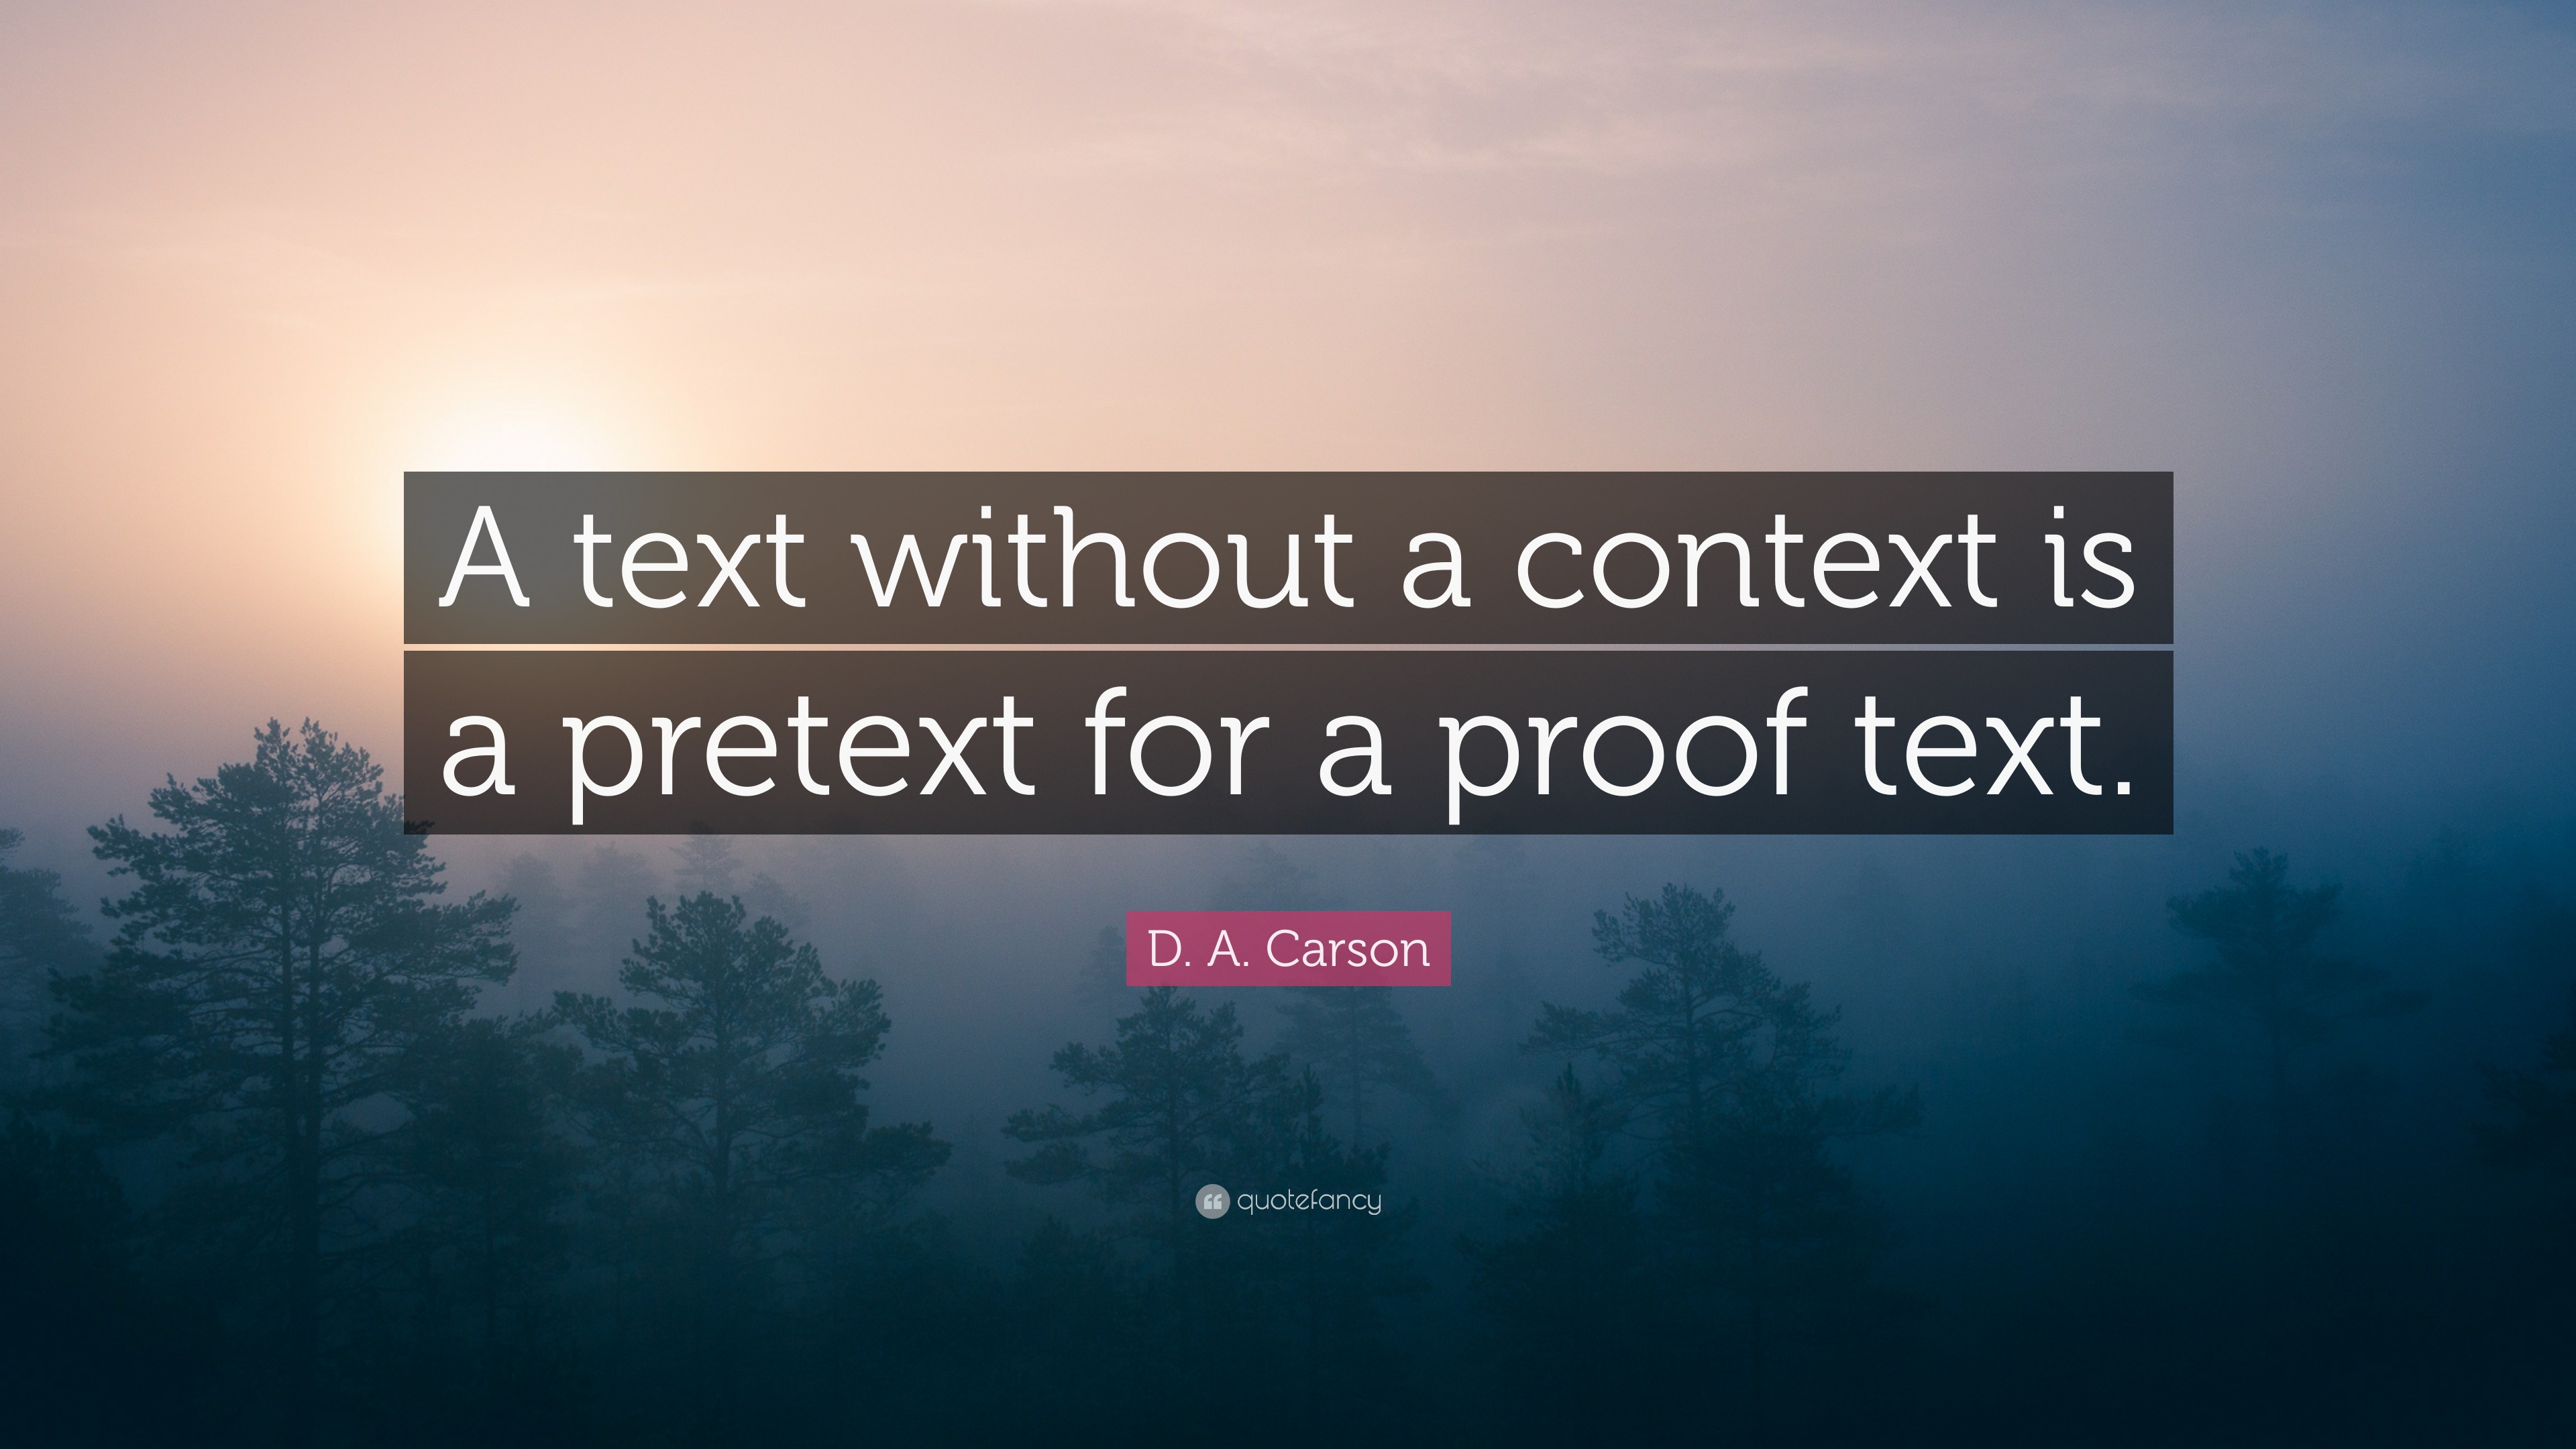 D. A. Carson Quote: “A text without a context is a pretext for a proof text .”